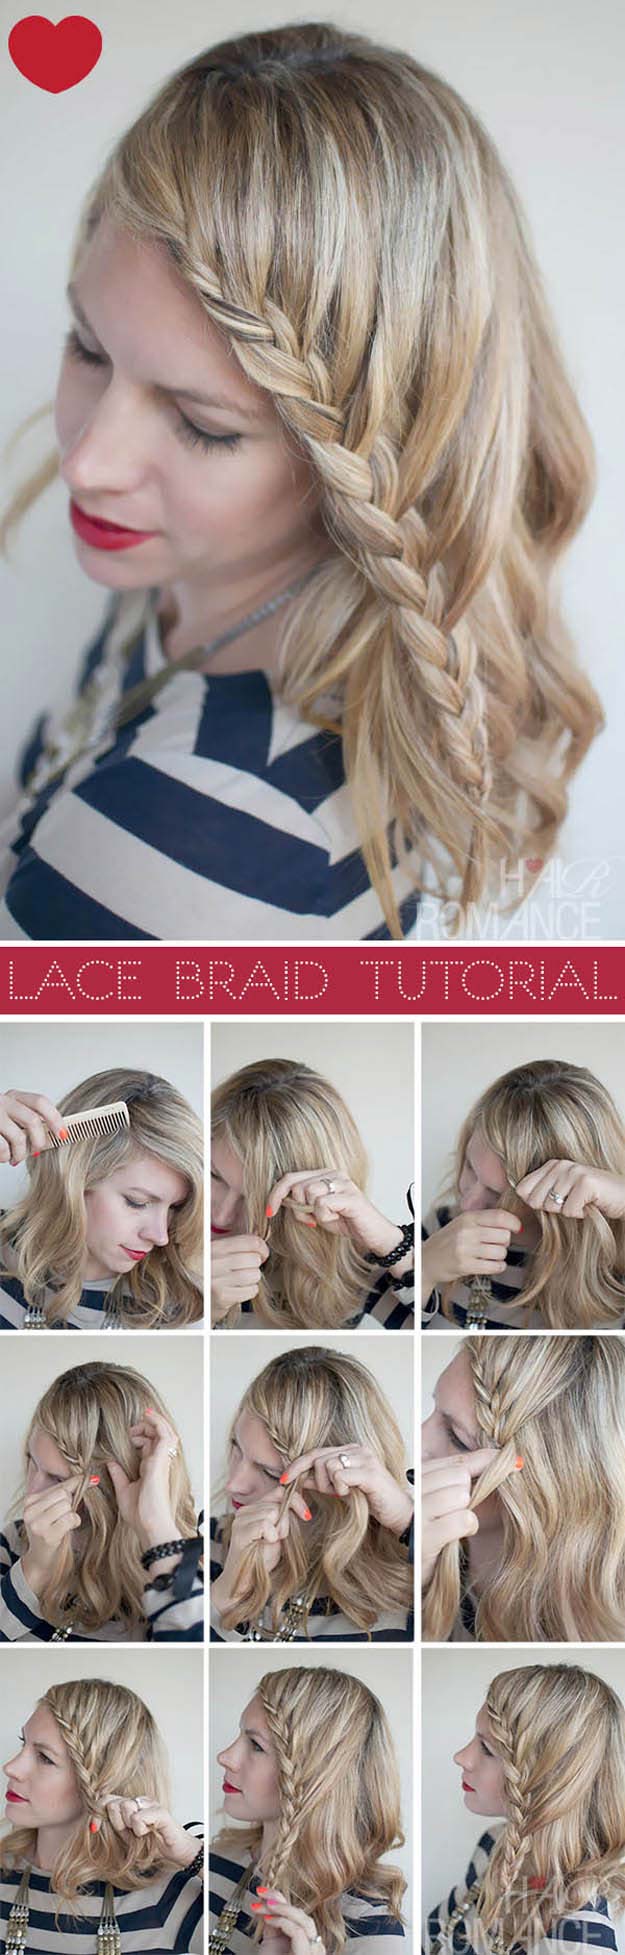 tips-for-thicker-hair-lace-braid-hairstyle-tutorial